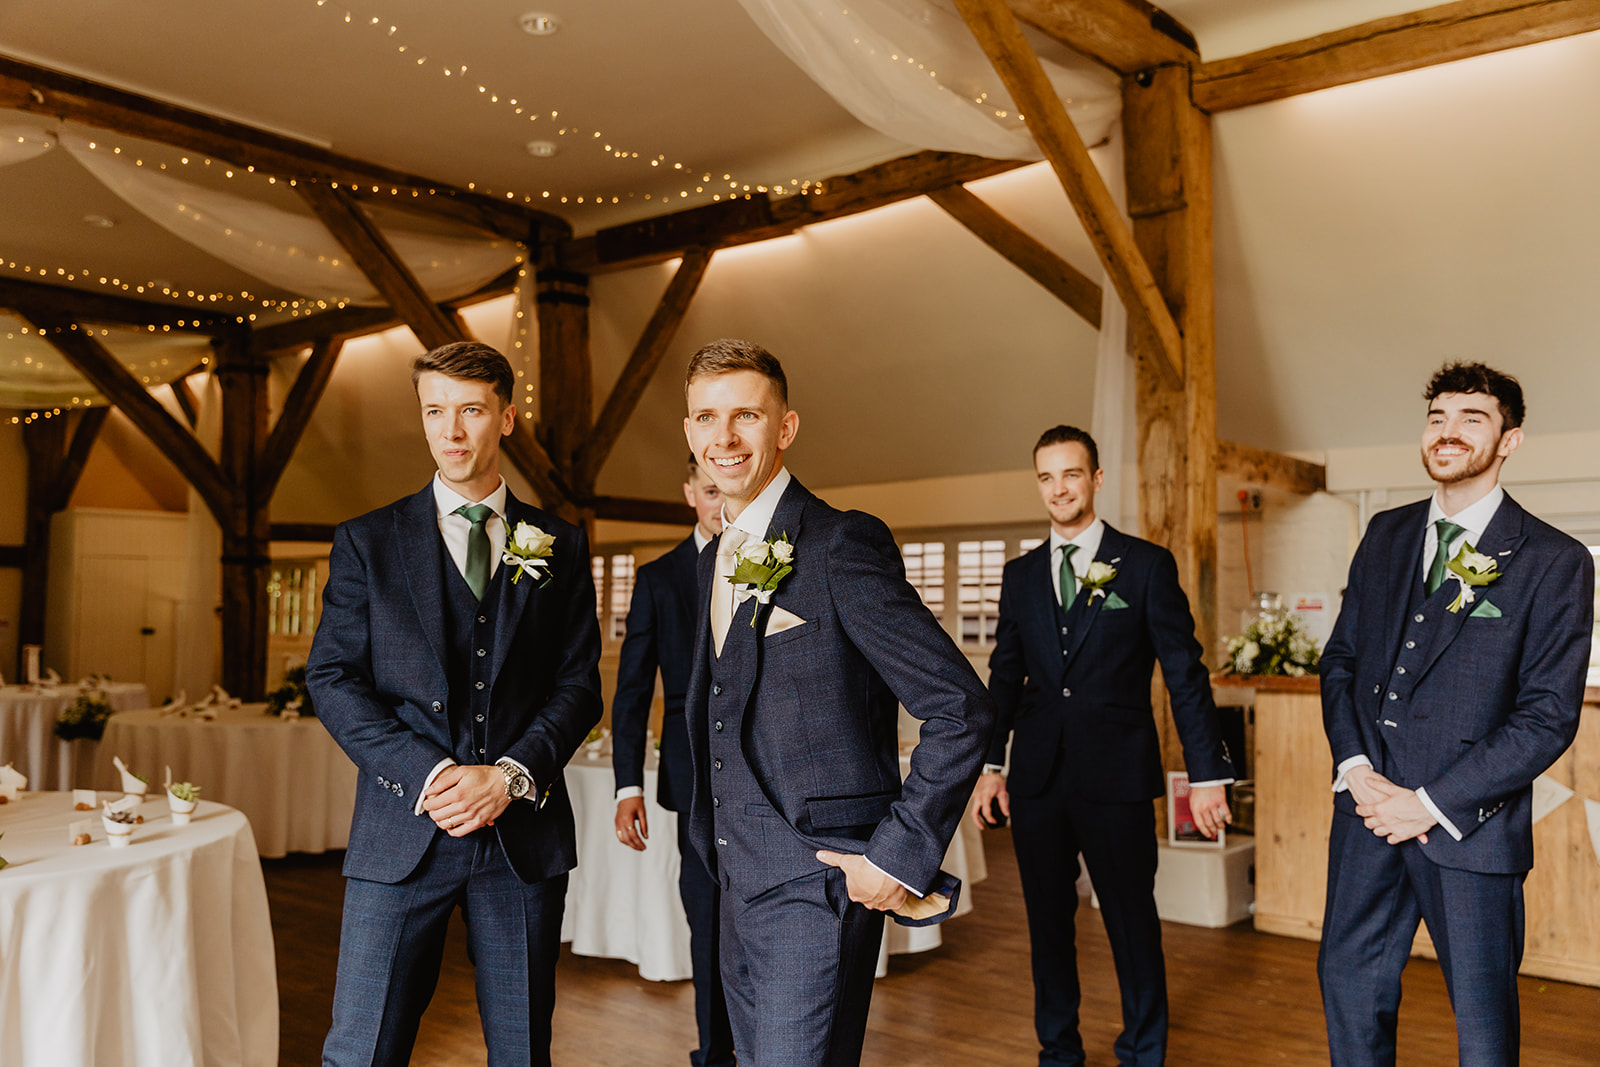 Groomsmen and groom at a Bury Manor Barn Wedding in Sussex. Photographer OliveJoy Photography.